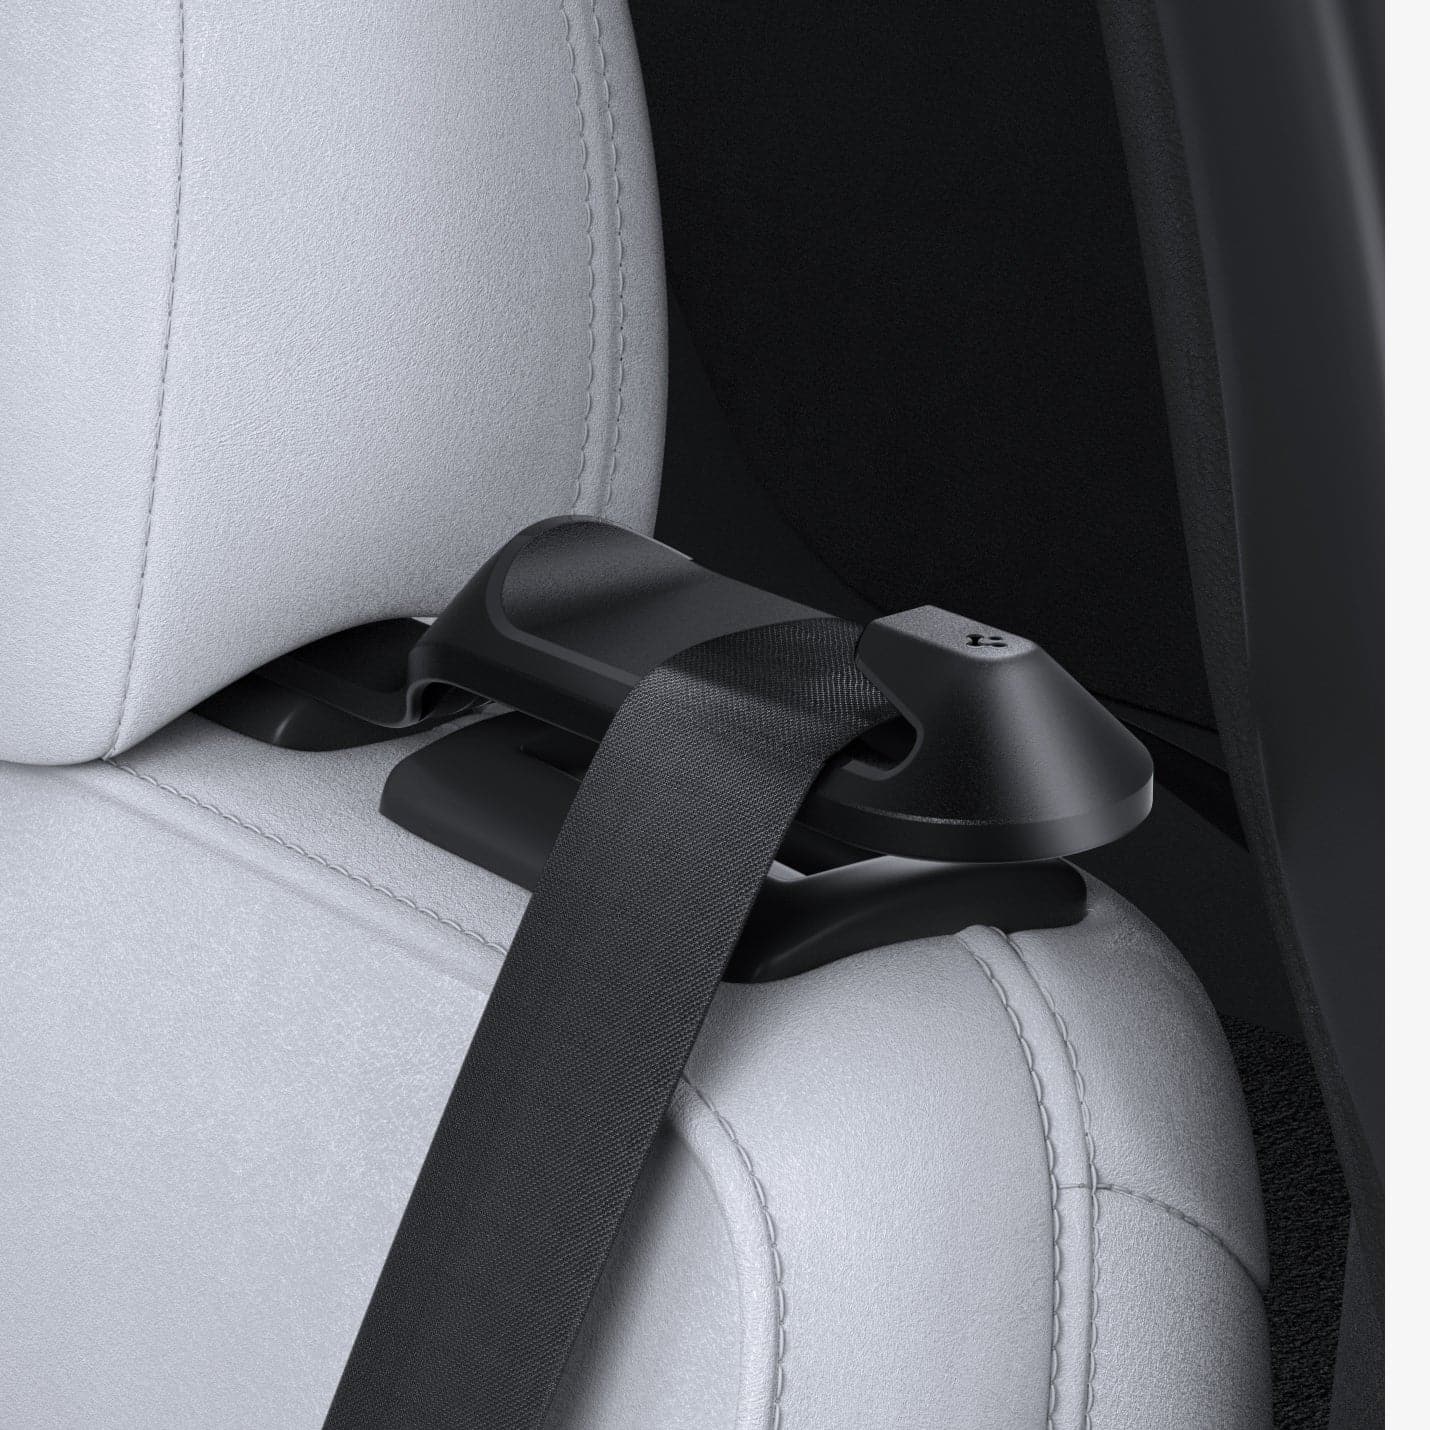 ACP06041 - Tesla Model Y Backseat Seatbelt Guide in black showing the guide with seatbelt installed